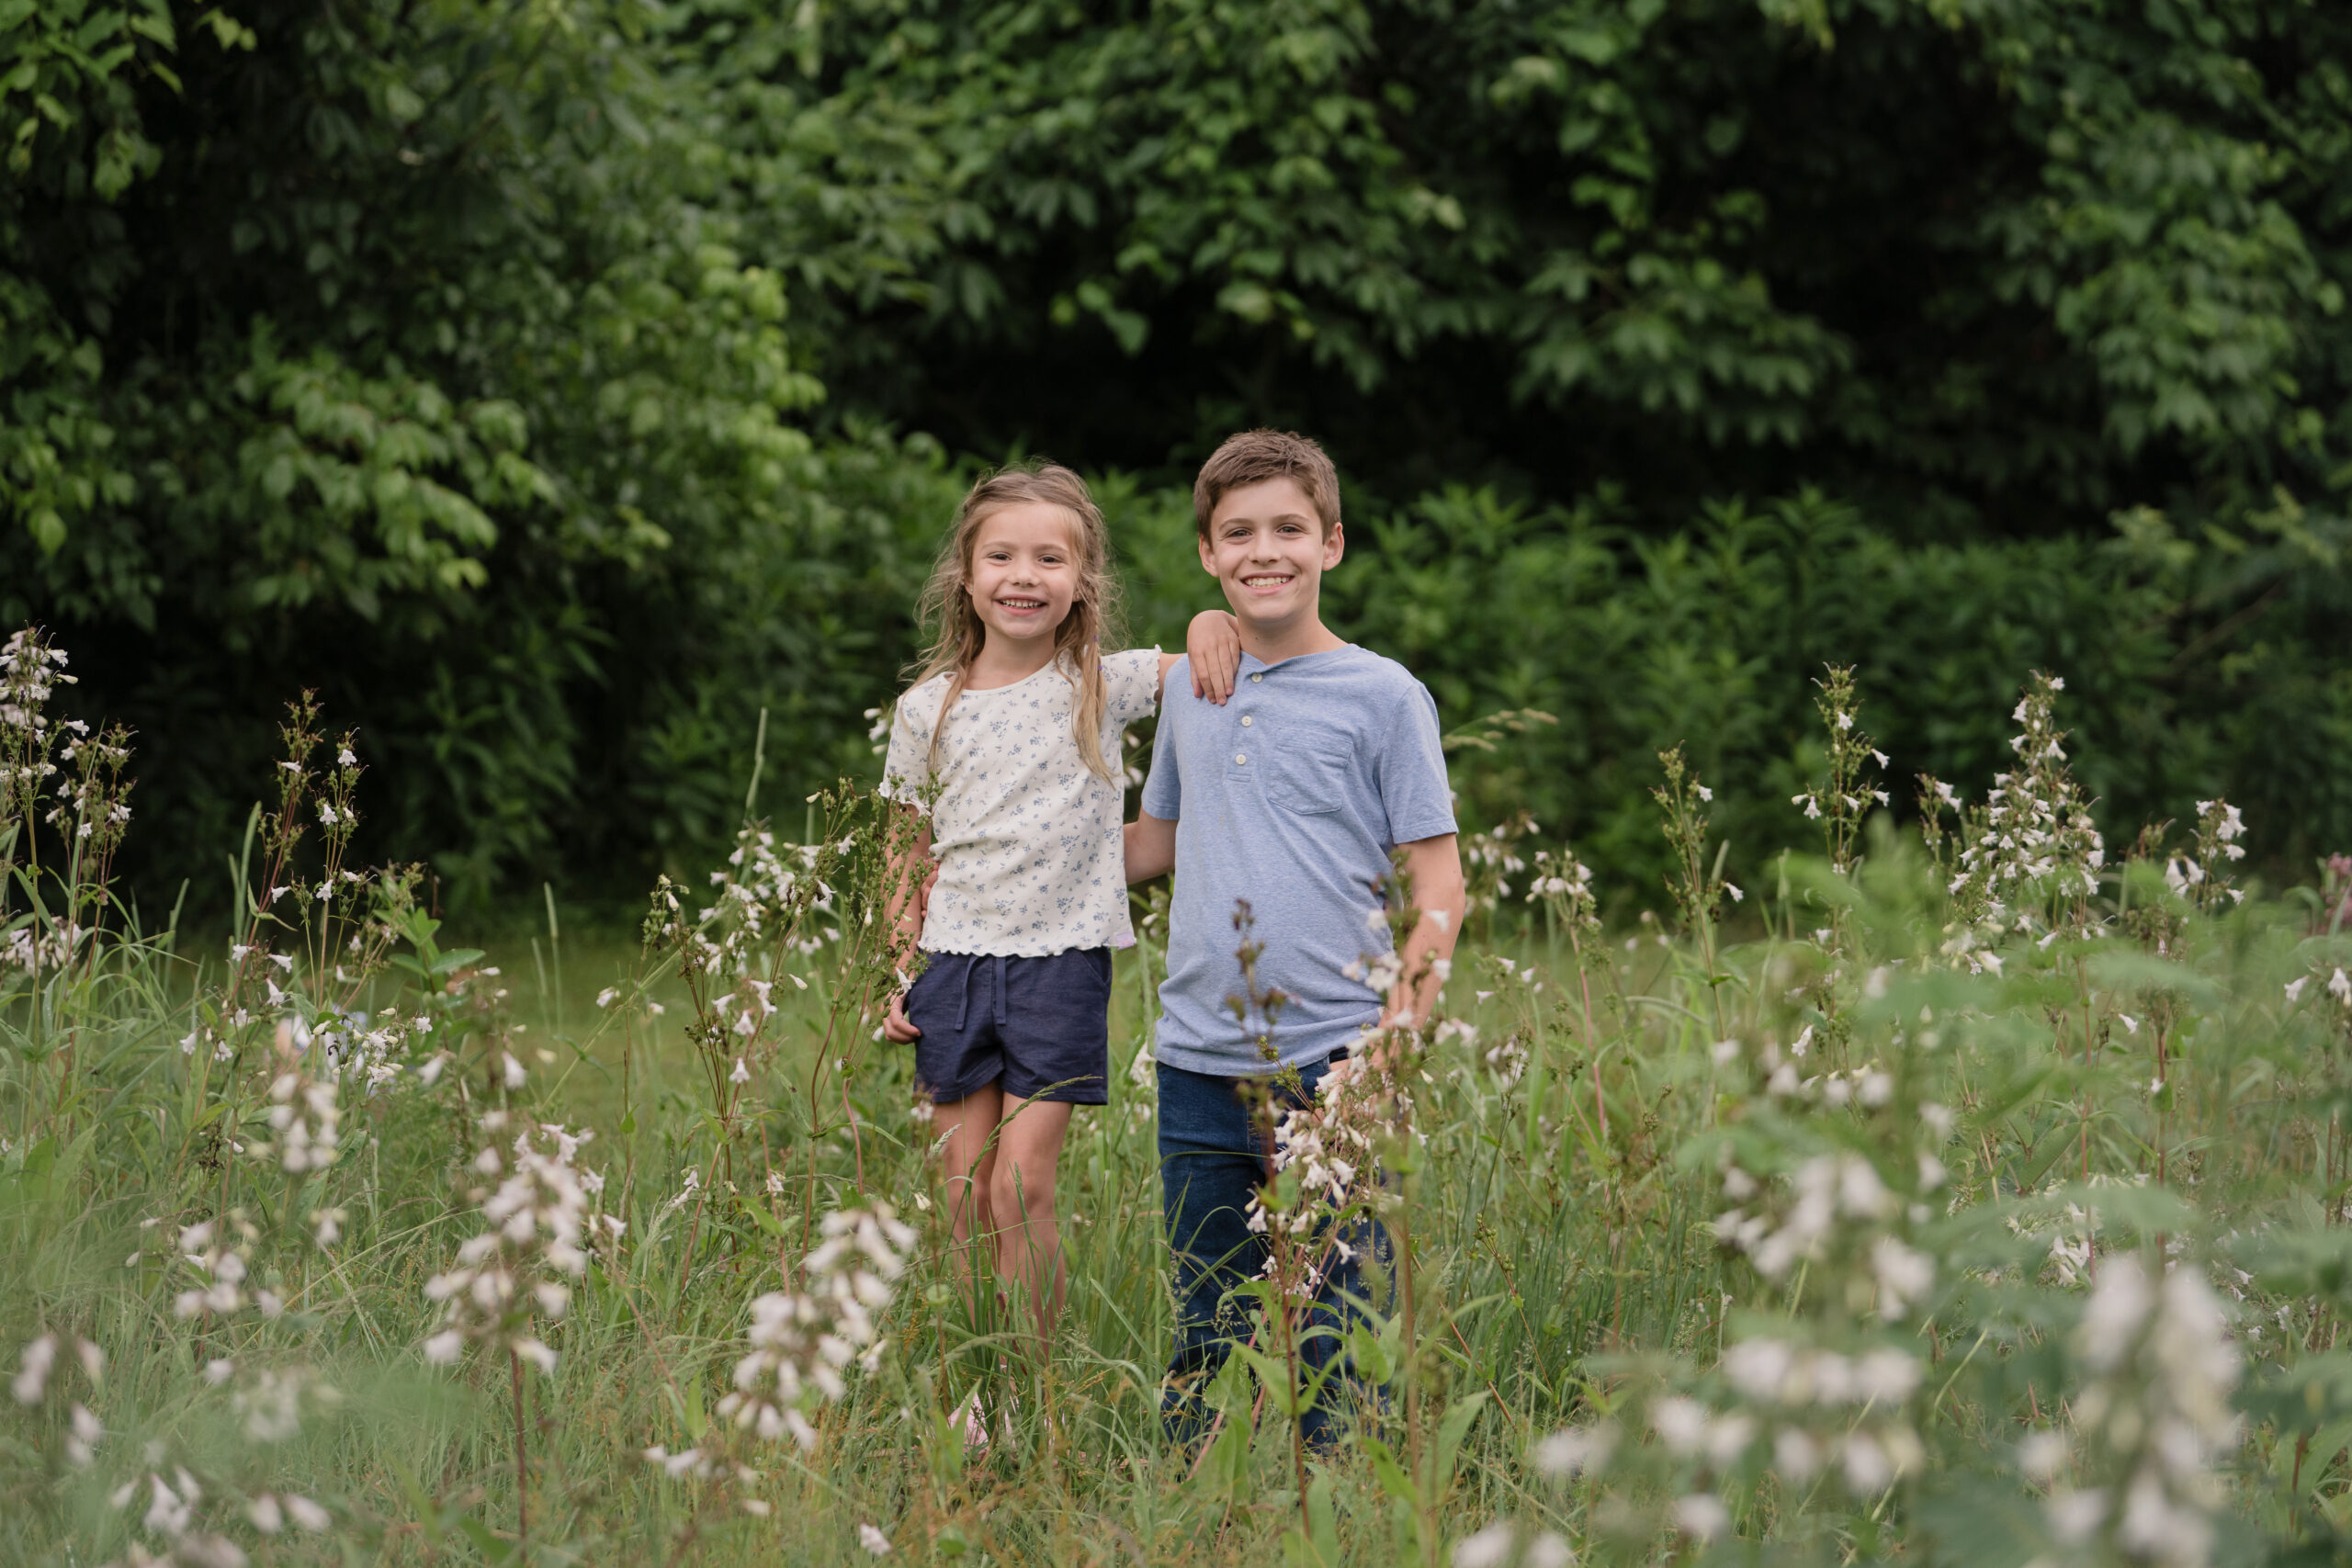 girl standing in the flower field with her arms placed on the boy's shoulder aknd them smiling in front. Boy posing in a field for a photography session near Marietta, OH. Lori Pickens Photography took the picture and is based out of Parkersburg, WV